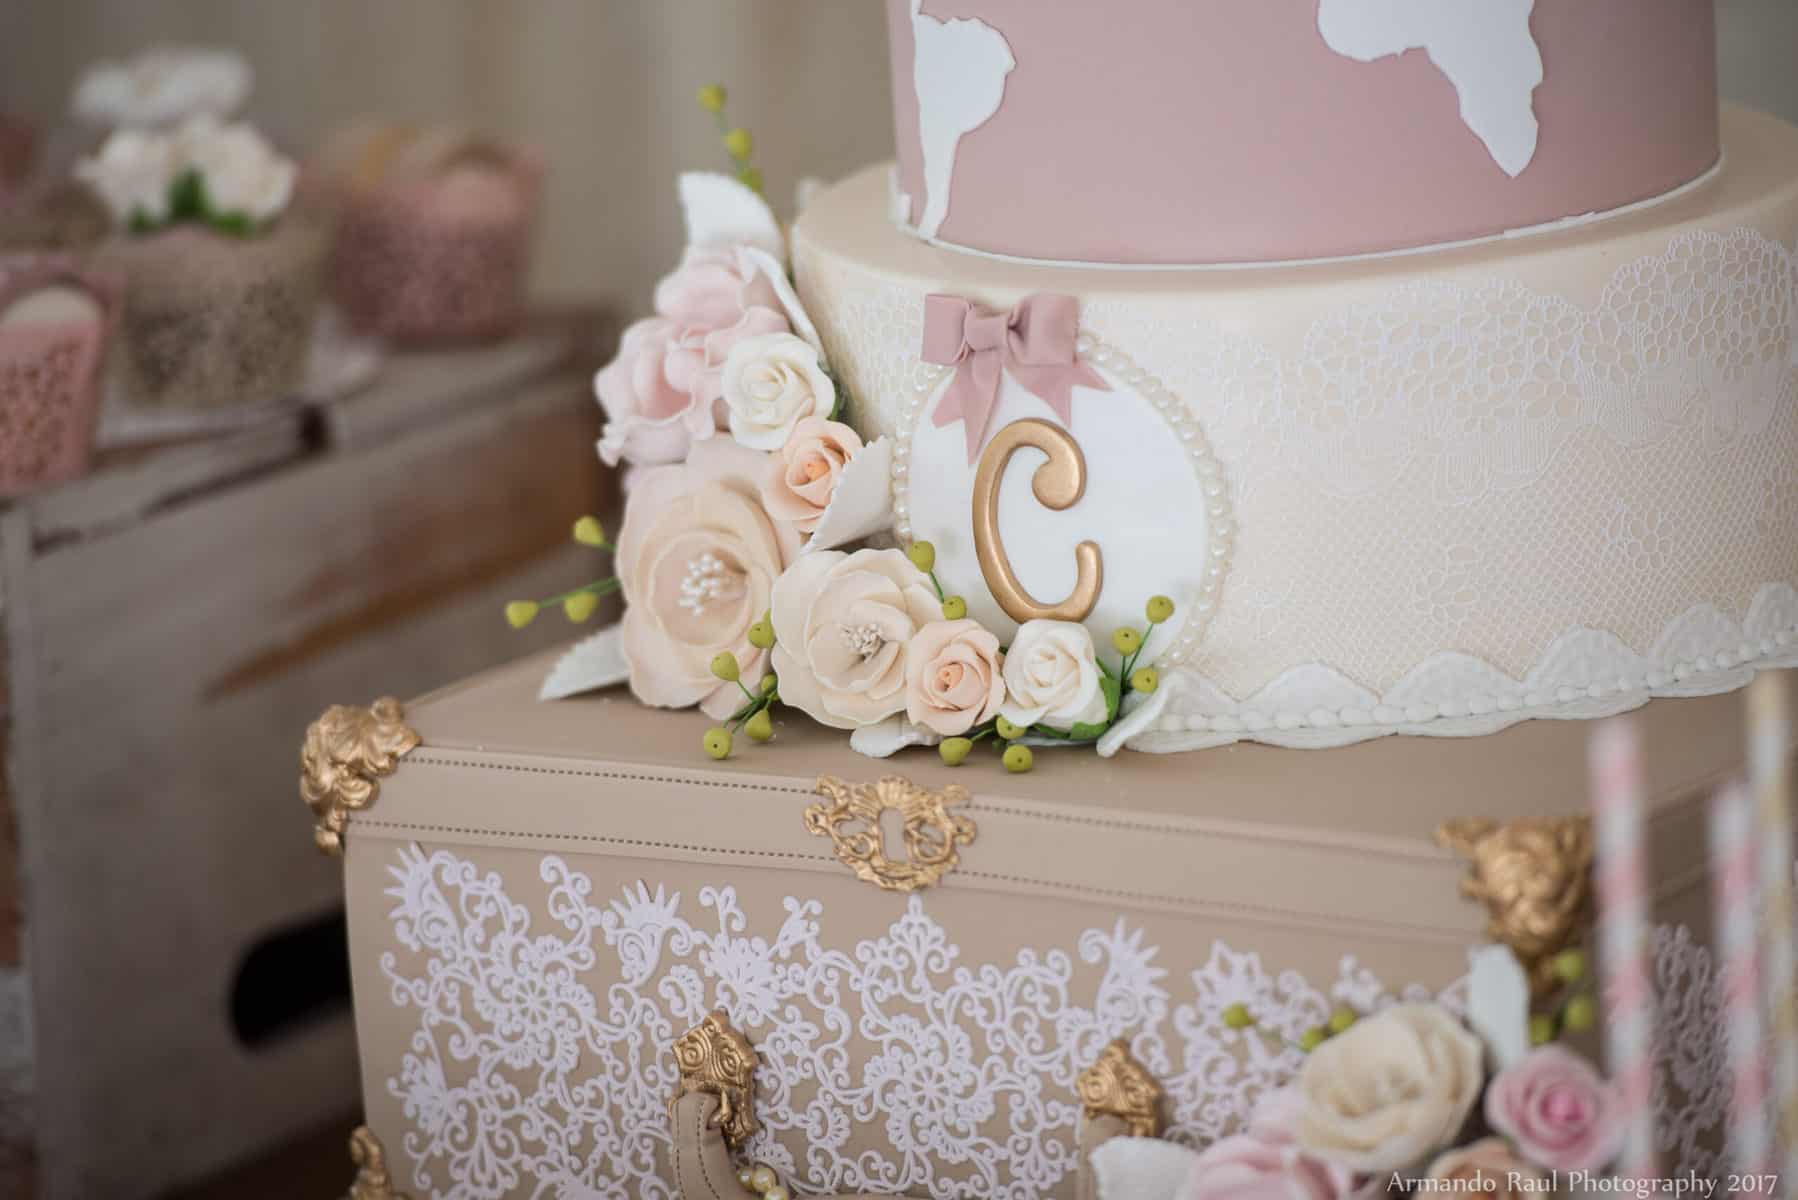 Girl Baby Shower Cake with Vintage Luggage, Lace, Pink, Flowers, Pearls, Bows & a World Map | Vintage Travel Theme Baby Shower | Baby Girl | You Are My Greatest Adventure | Lace, World Map, Flowers, Cameras, Vintage Decor | Cake, Sweets, Desserts, Lounge Seating Area, World Cuisine, Food Stations, Seating Arrangement | Home Baby Shower | Blush Pink, Beige, Gold, Champagne, White